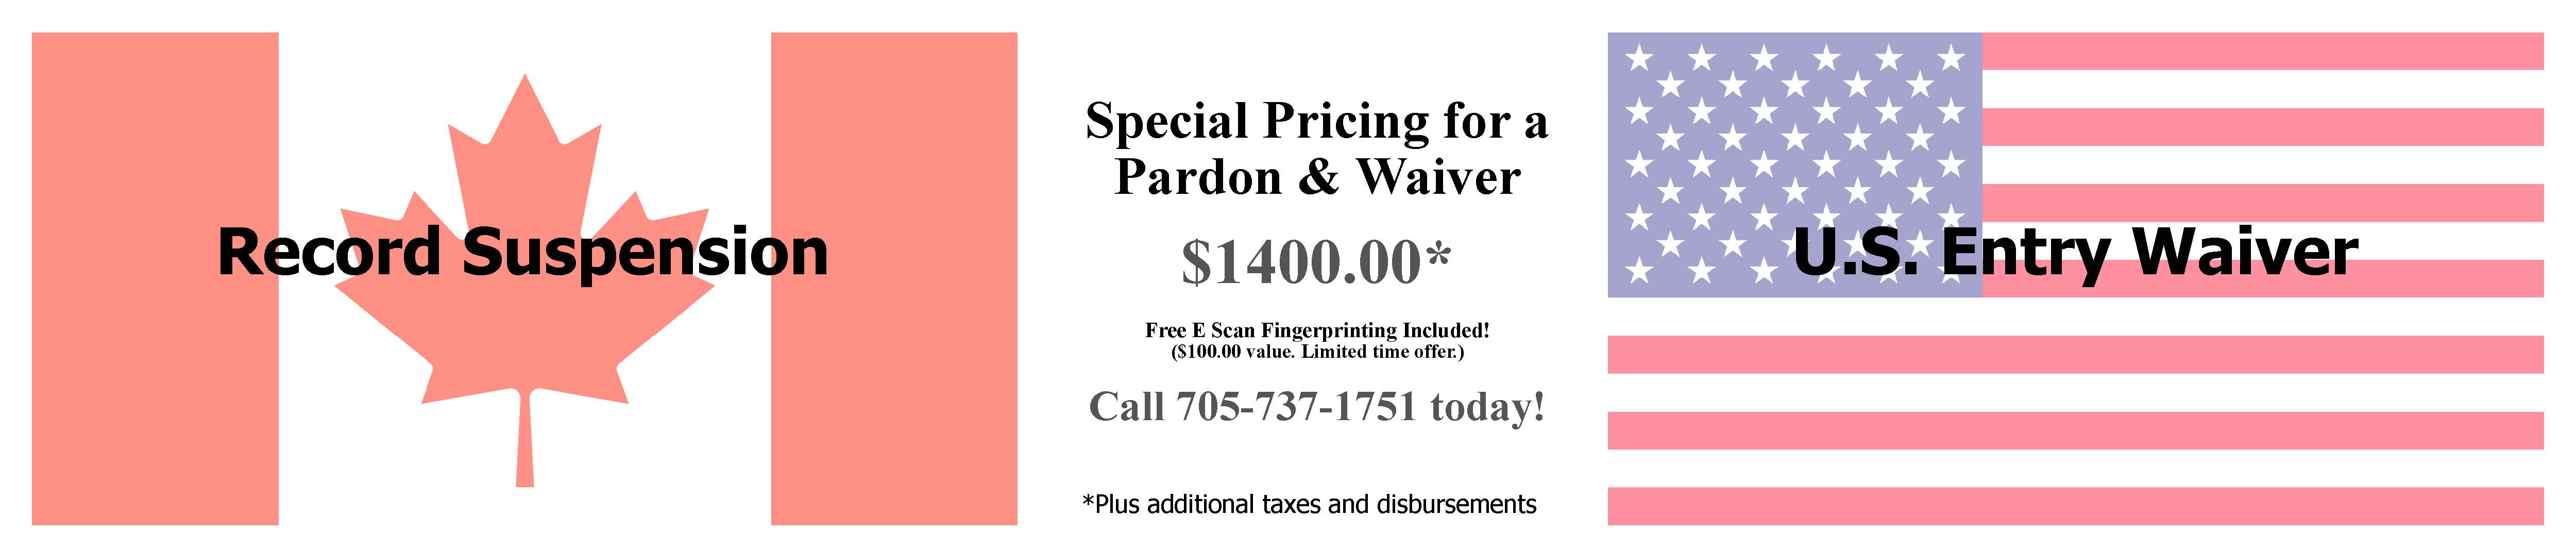 Special Pricing Pardon and Waiver